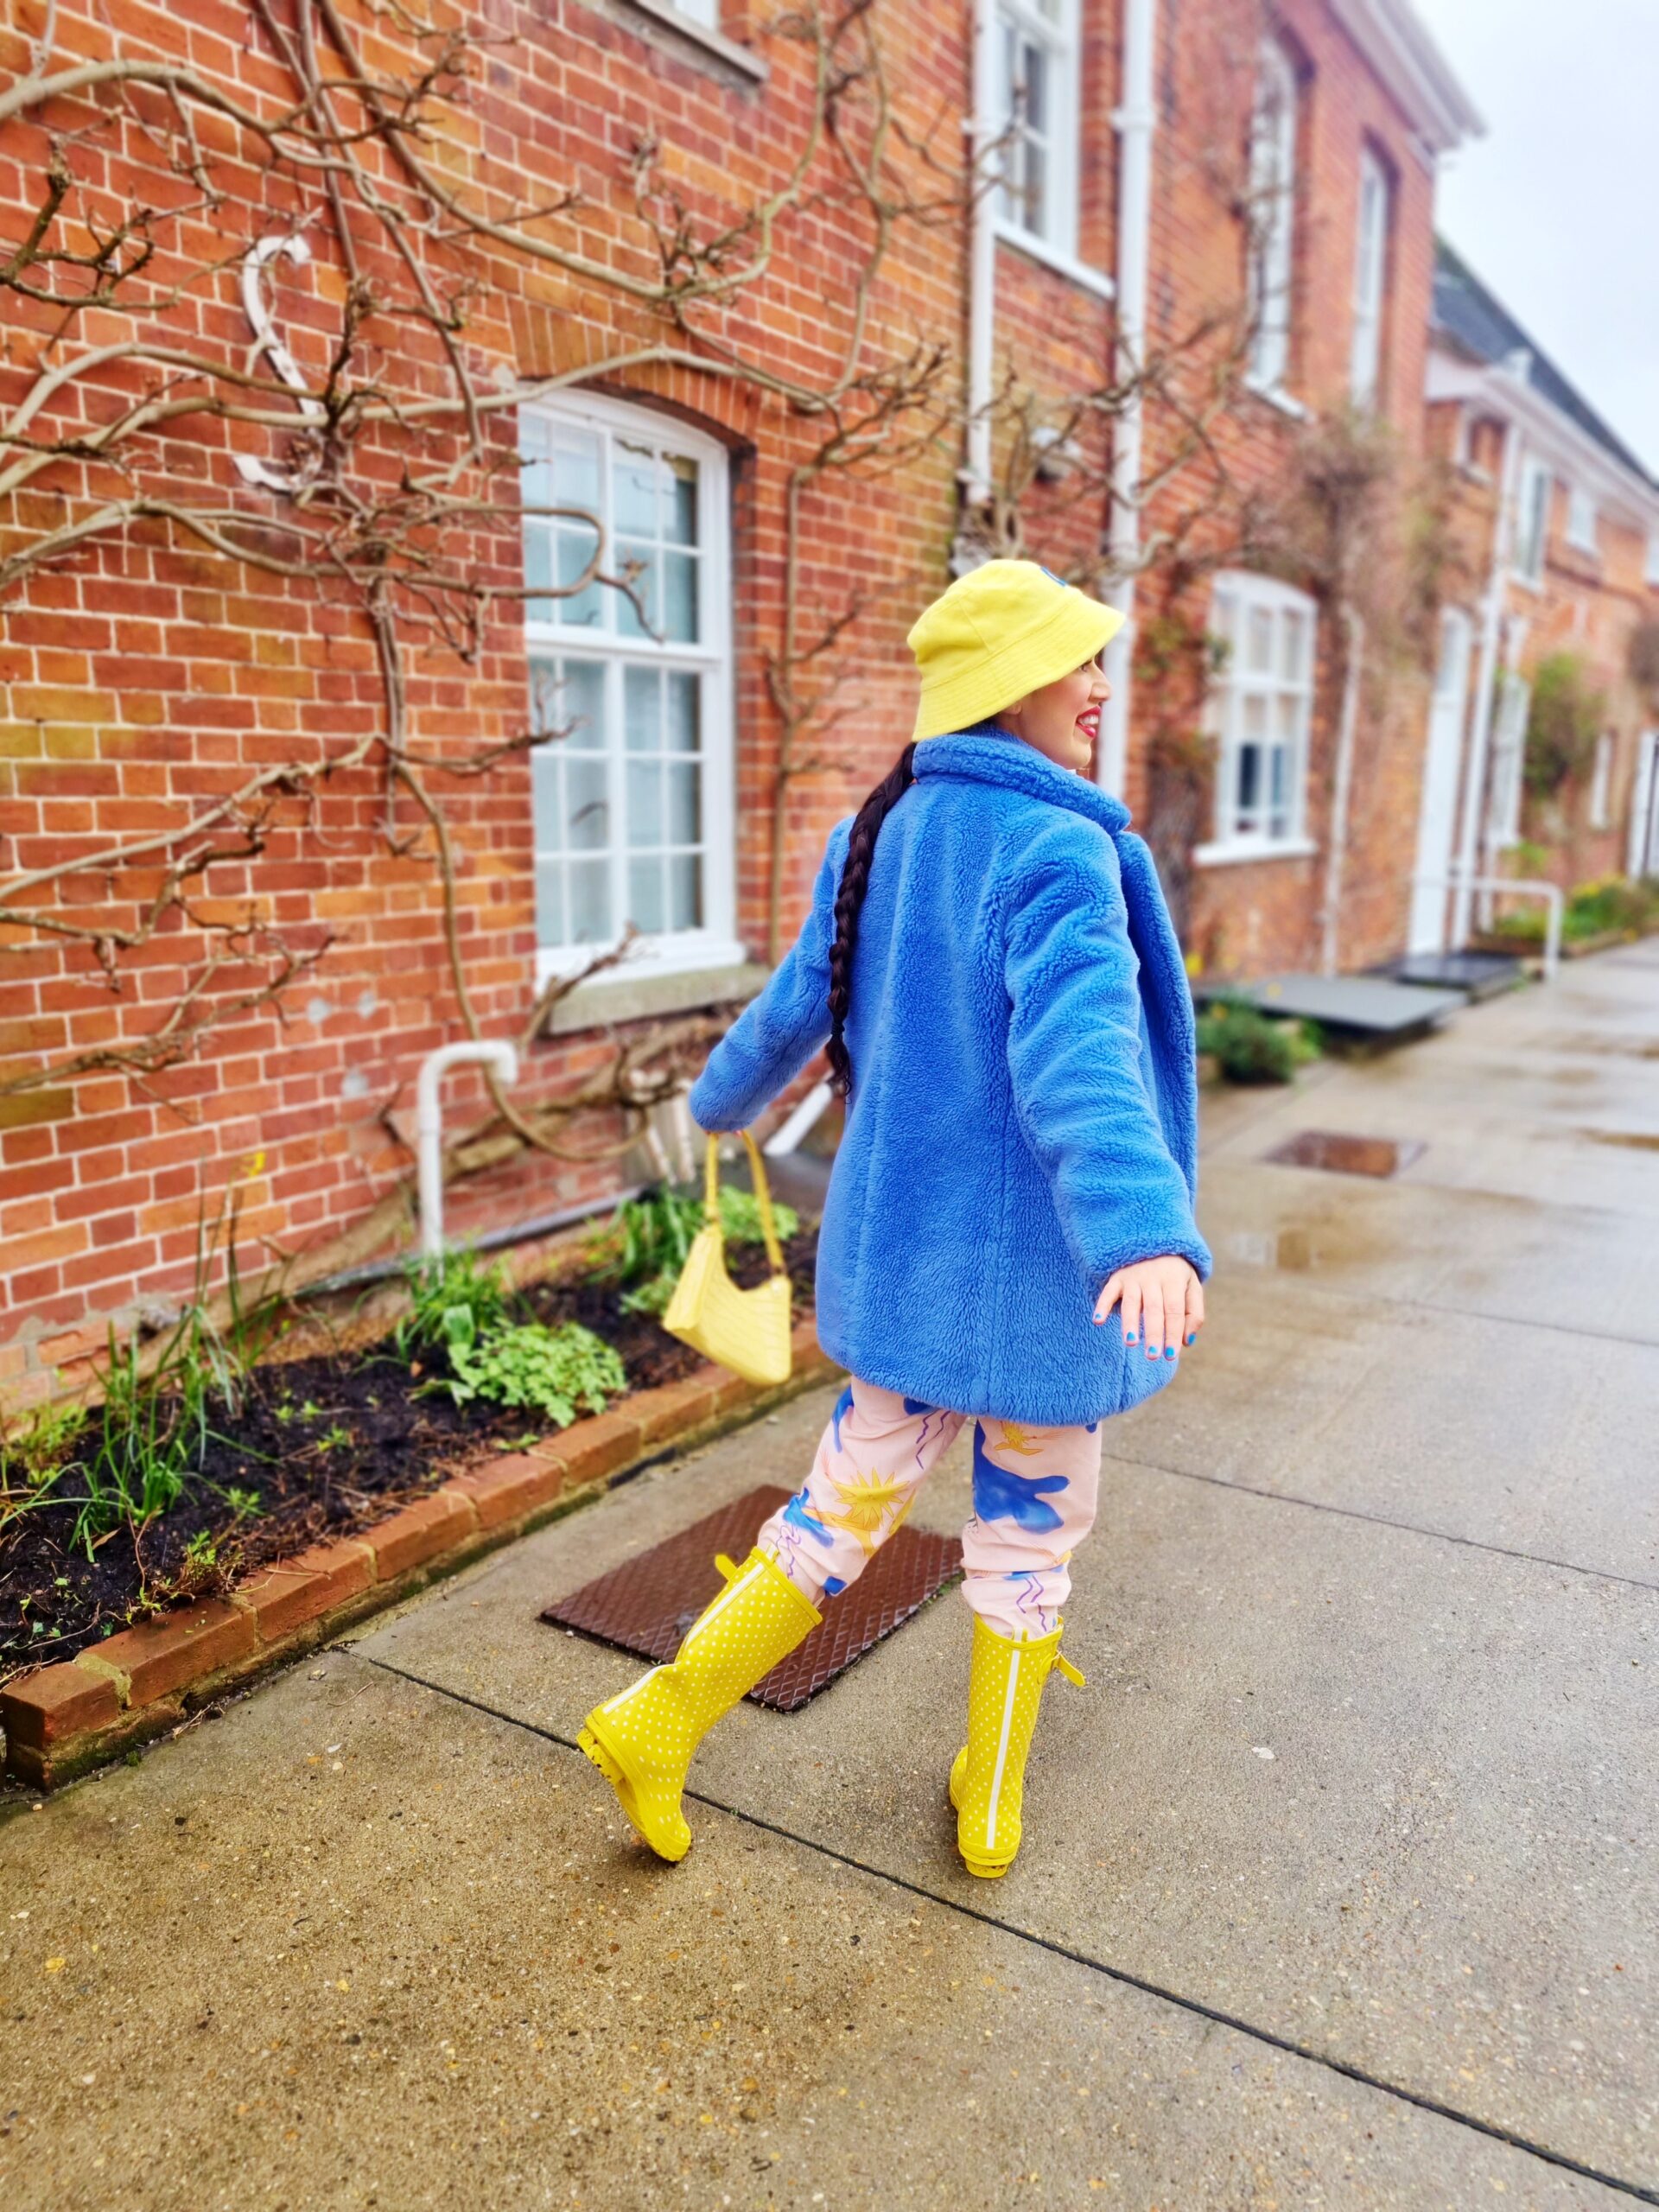 <img src="ana.jpg" alt="ana in yellow wellies and jumpsuit aldeburgh"/>